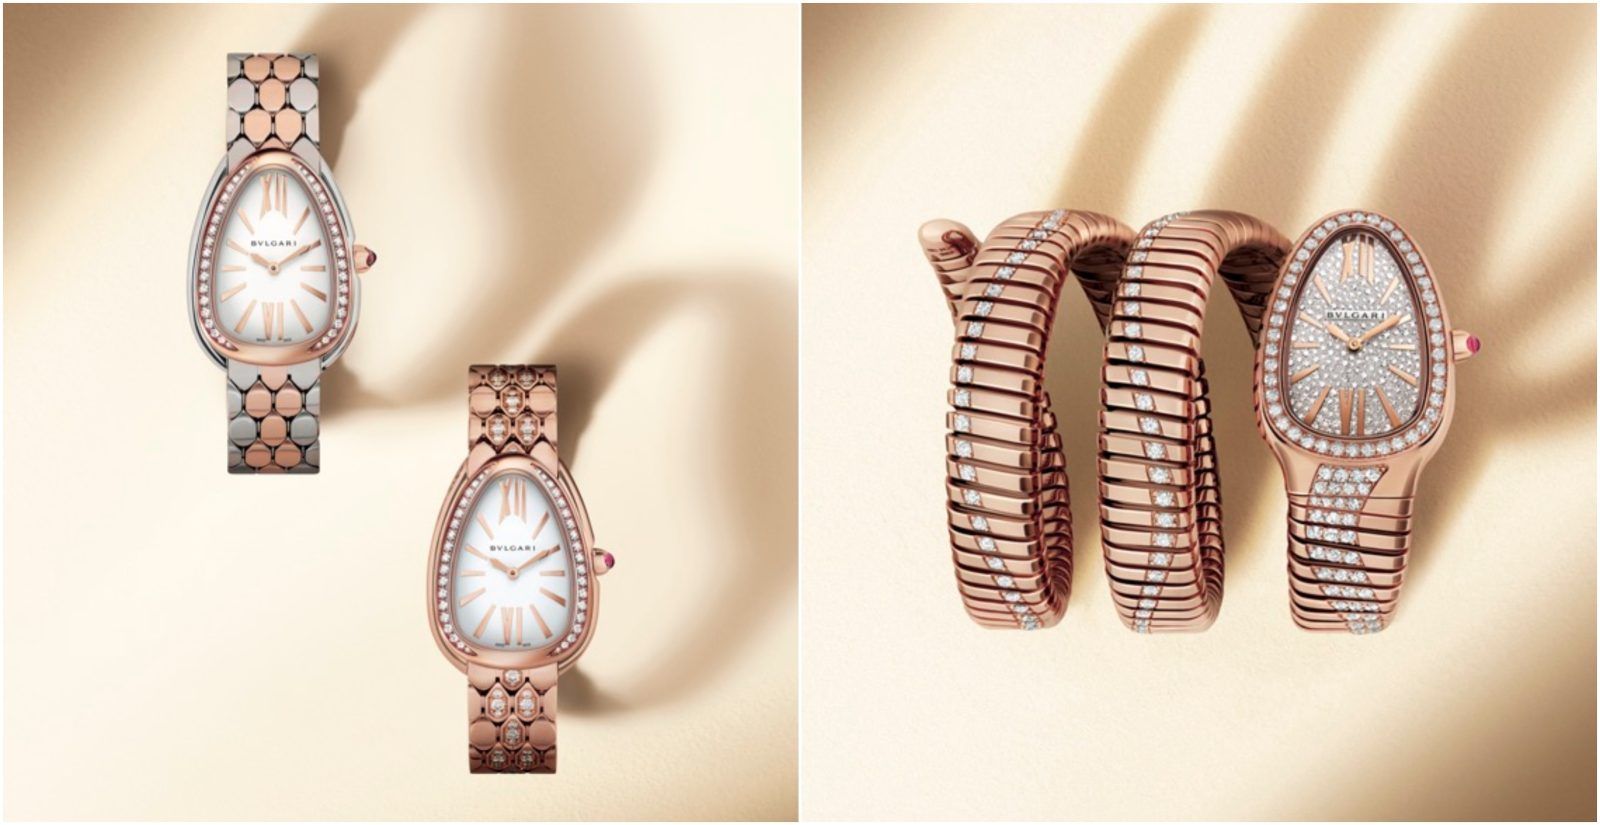 Celebrity Watch: Bulgari Watches And Jewellery In Made In Heaven